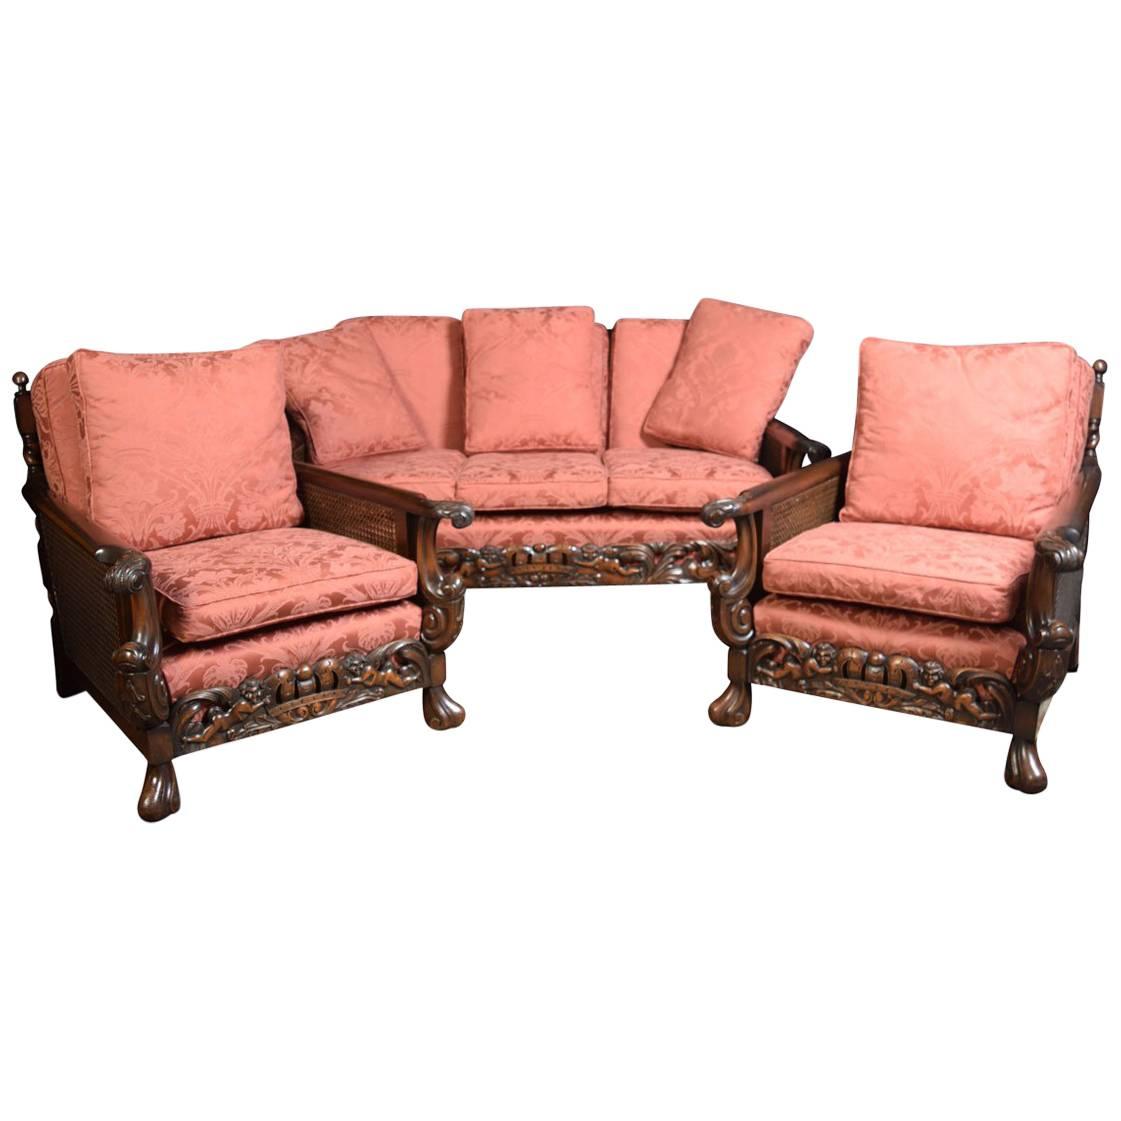 Edwardian Carved Mahogany Three-Piece Bergere Lounge Suite